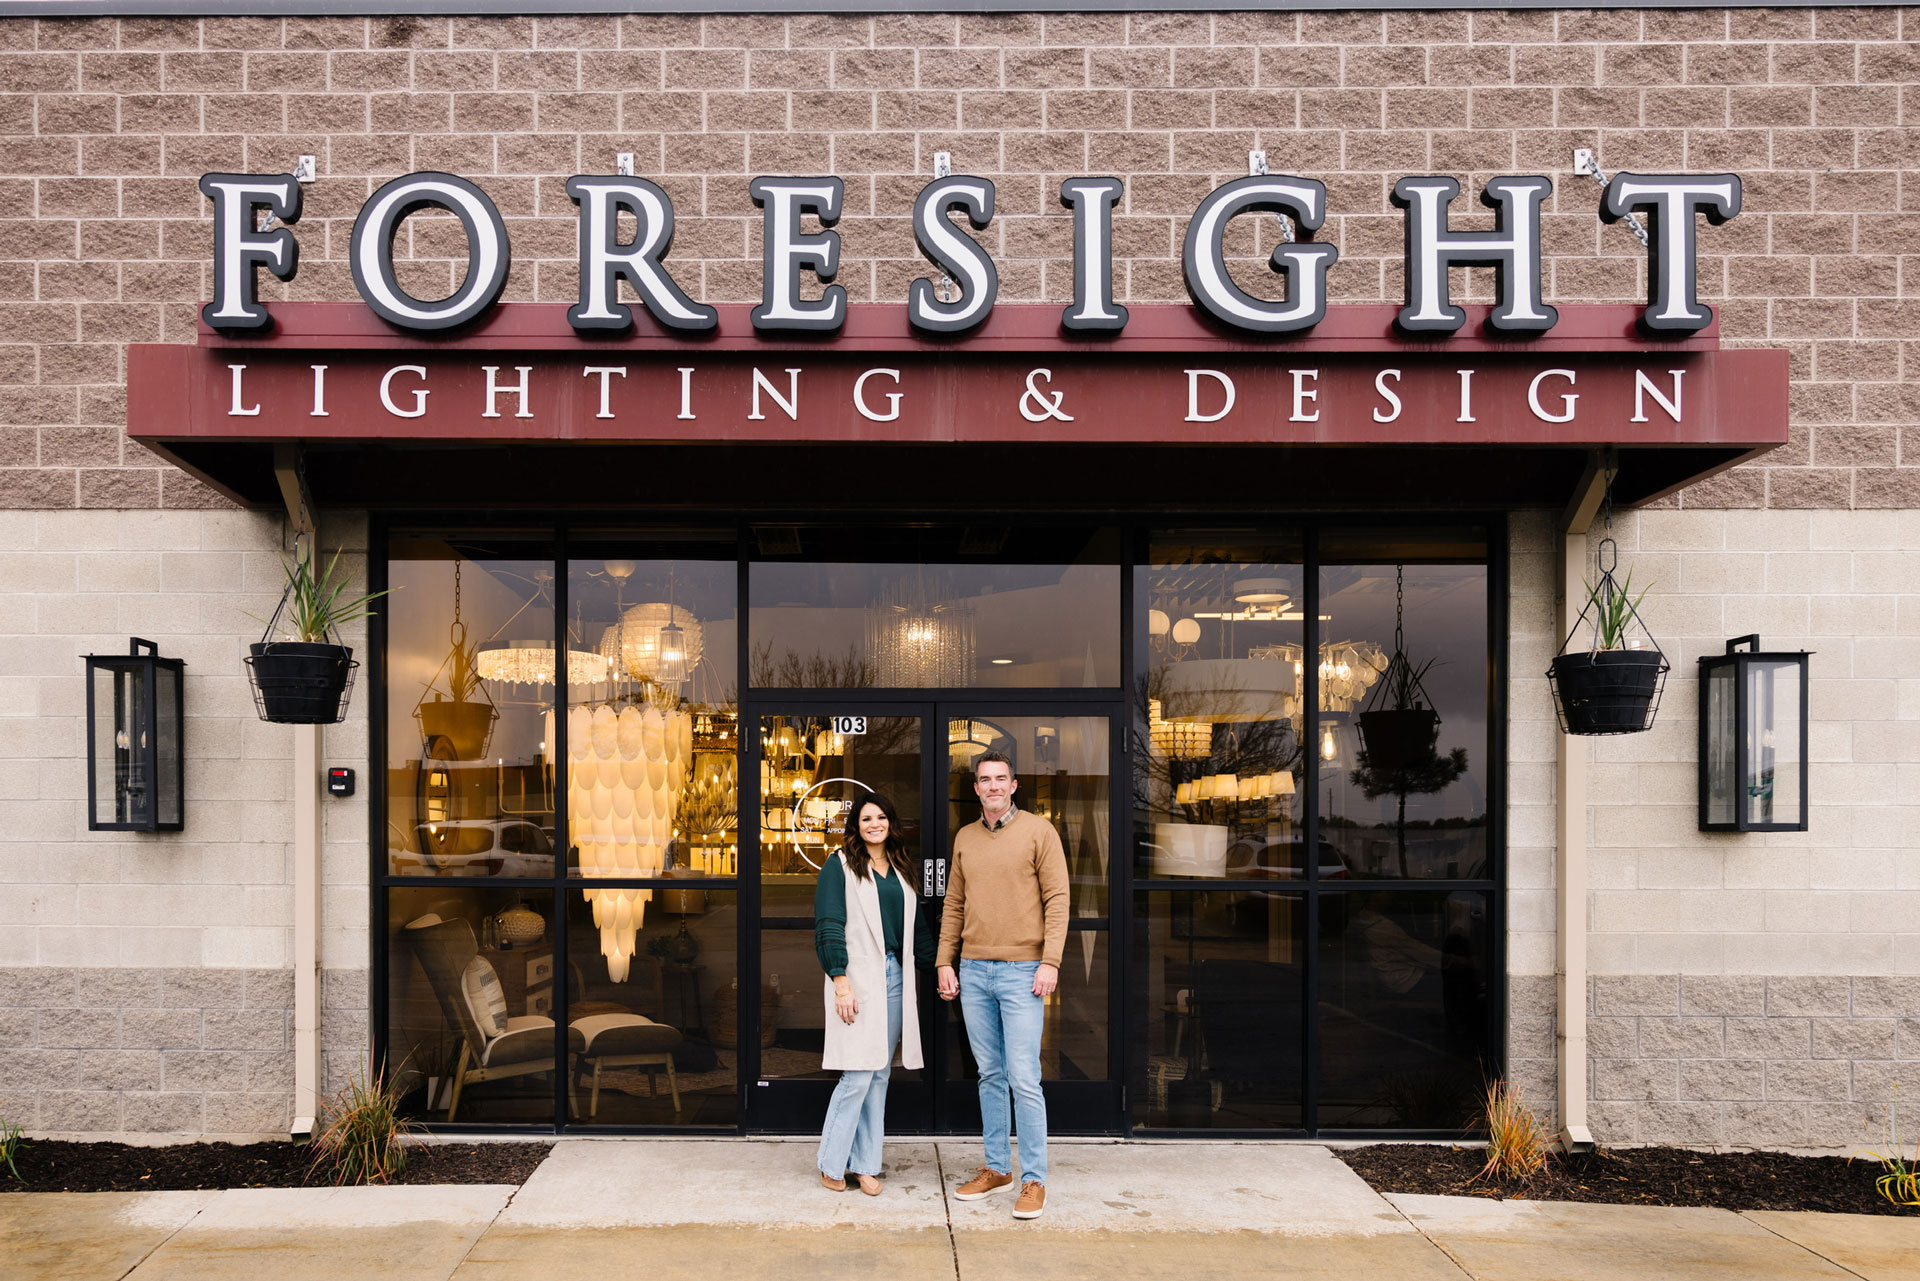 Man and woman in front of Foresight lighting & design store